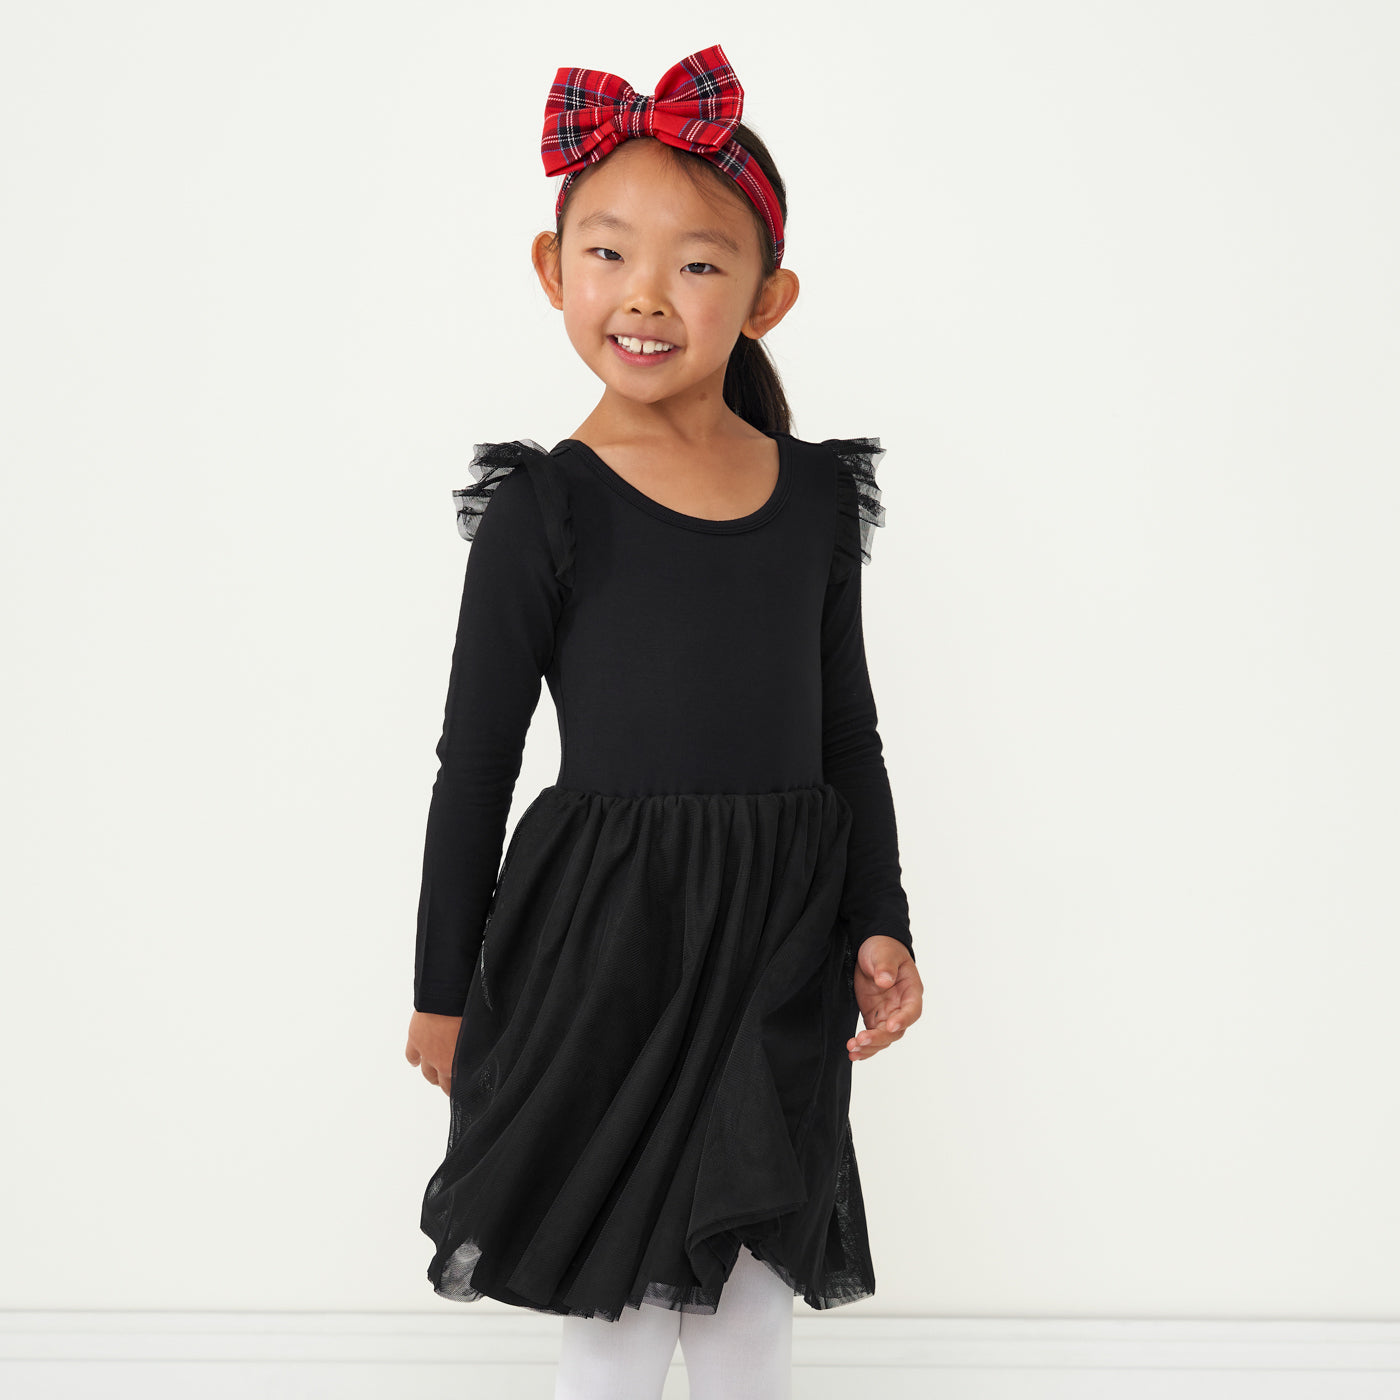 Alternate image of a child wearing a Black flutter tutu dress and coordinating Holiday Plaid luxe bow headband